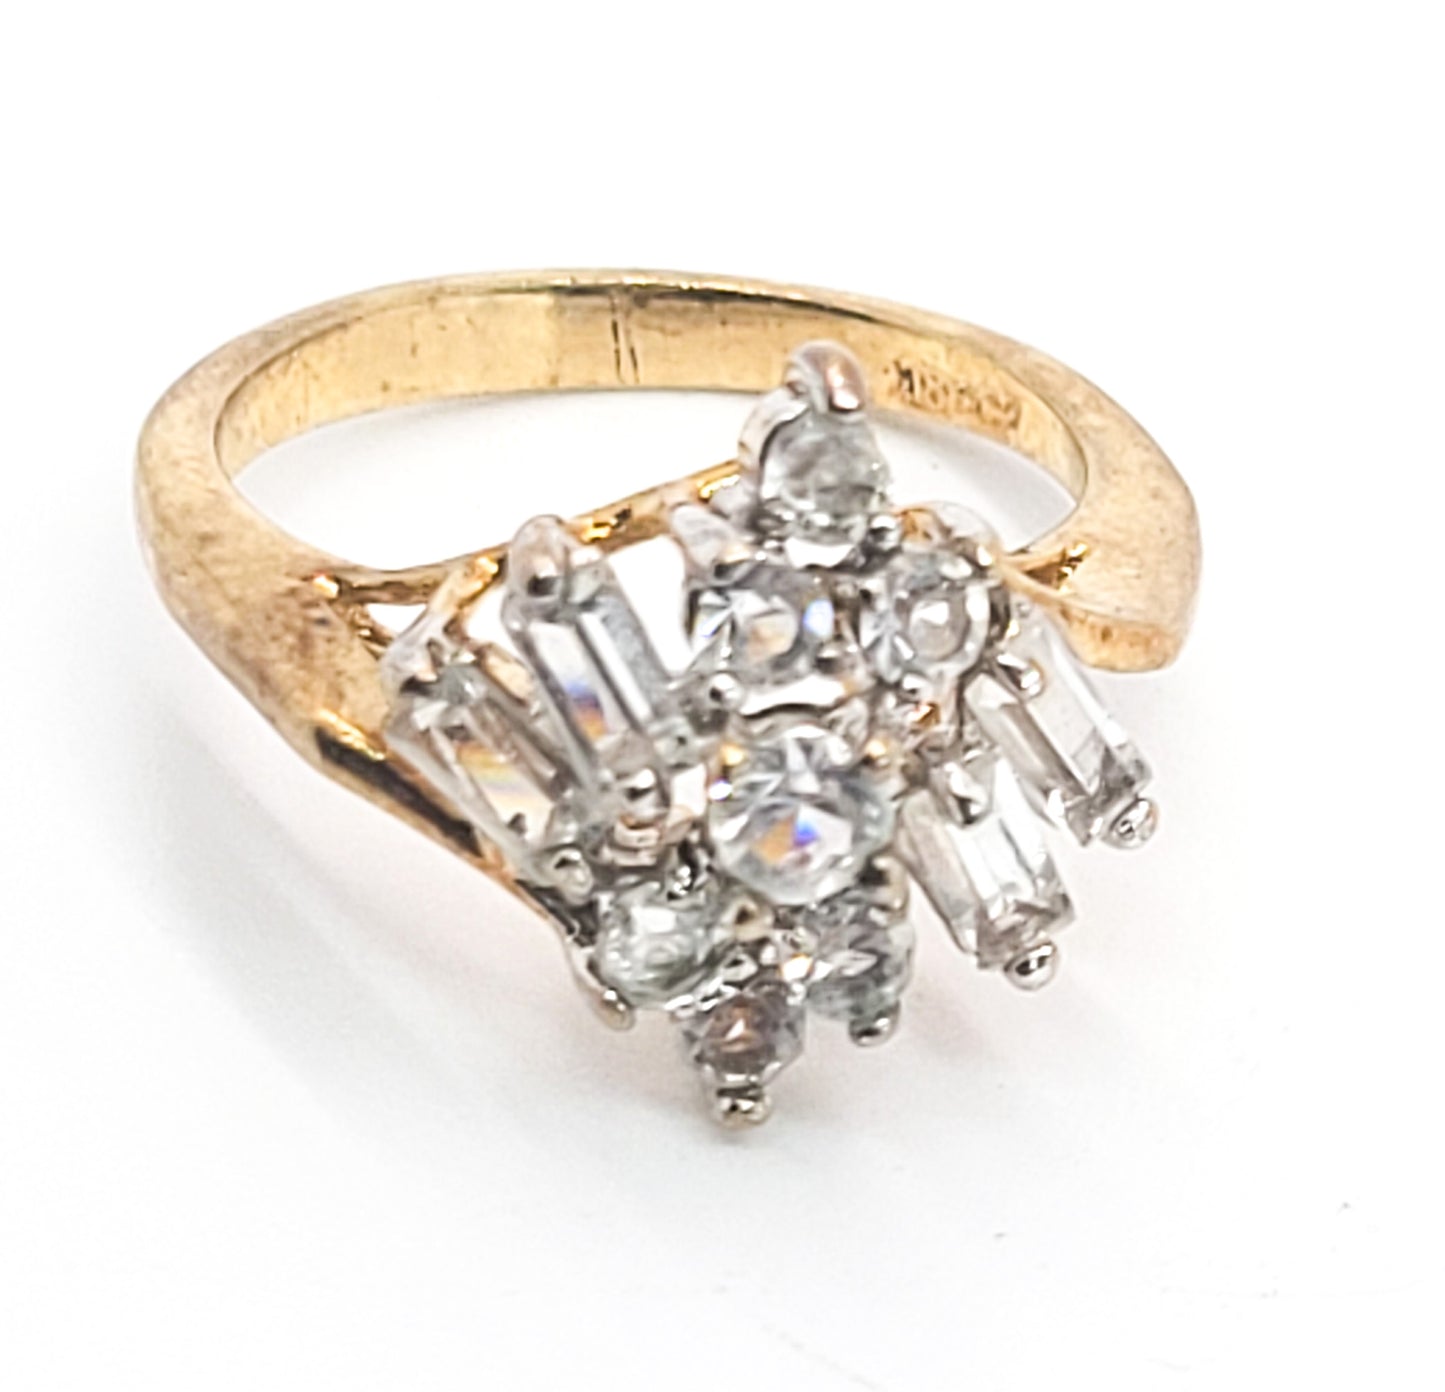 18kt gold filled Cubic zirconia yellow gold vintage cluster cocktail ring size 5.5